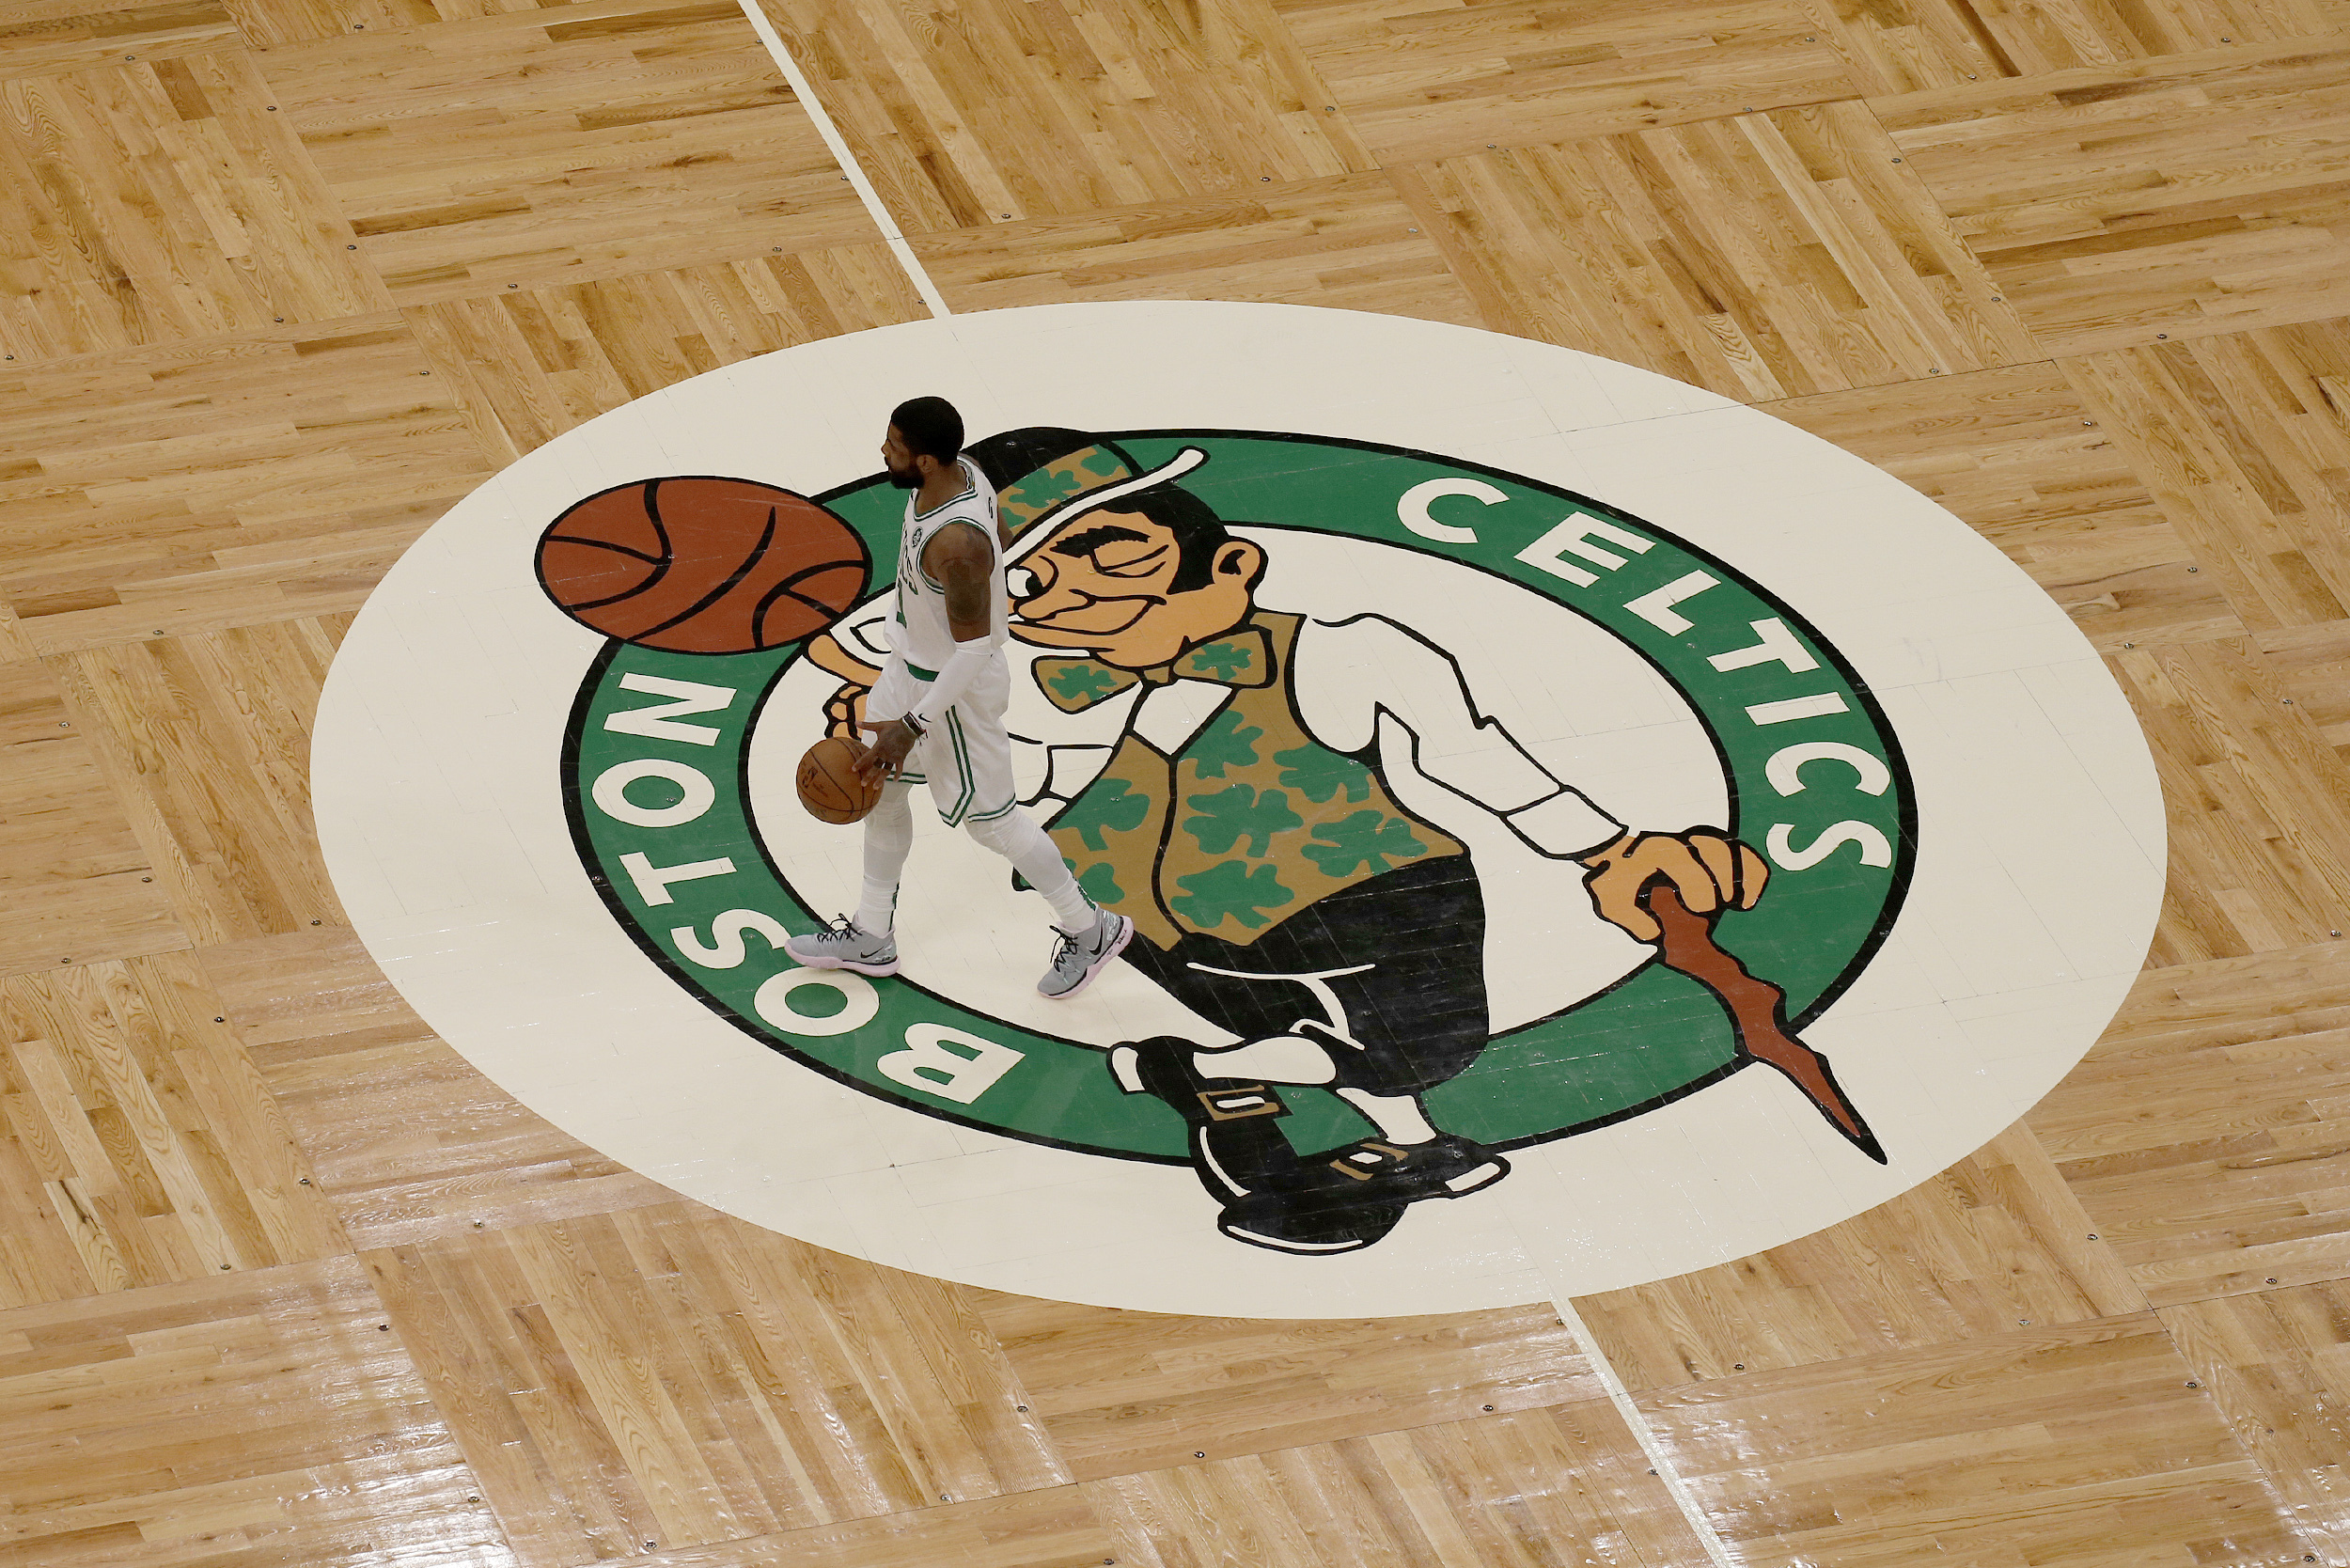 Celtics Fan Who Threw Drink At Spurs Bench Banned For Life Bleacher Report Latest News Videos And Highlights